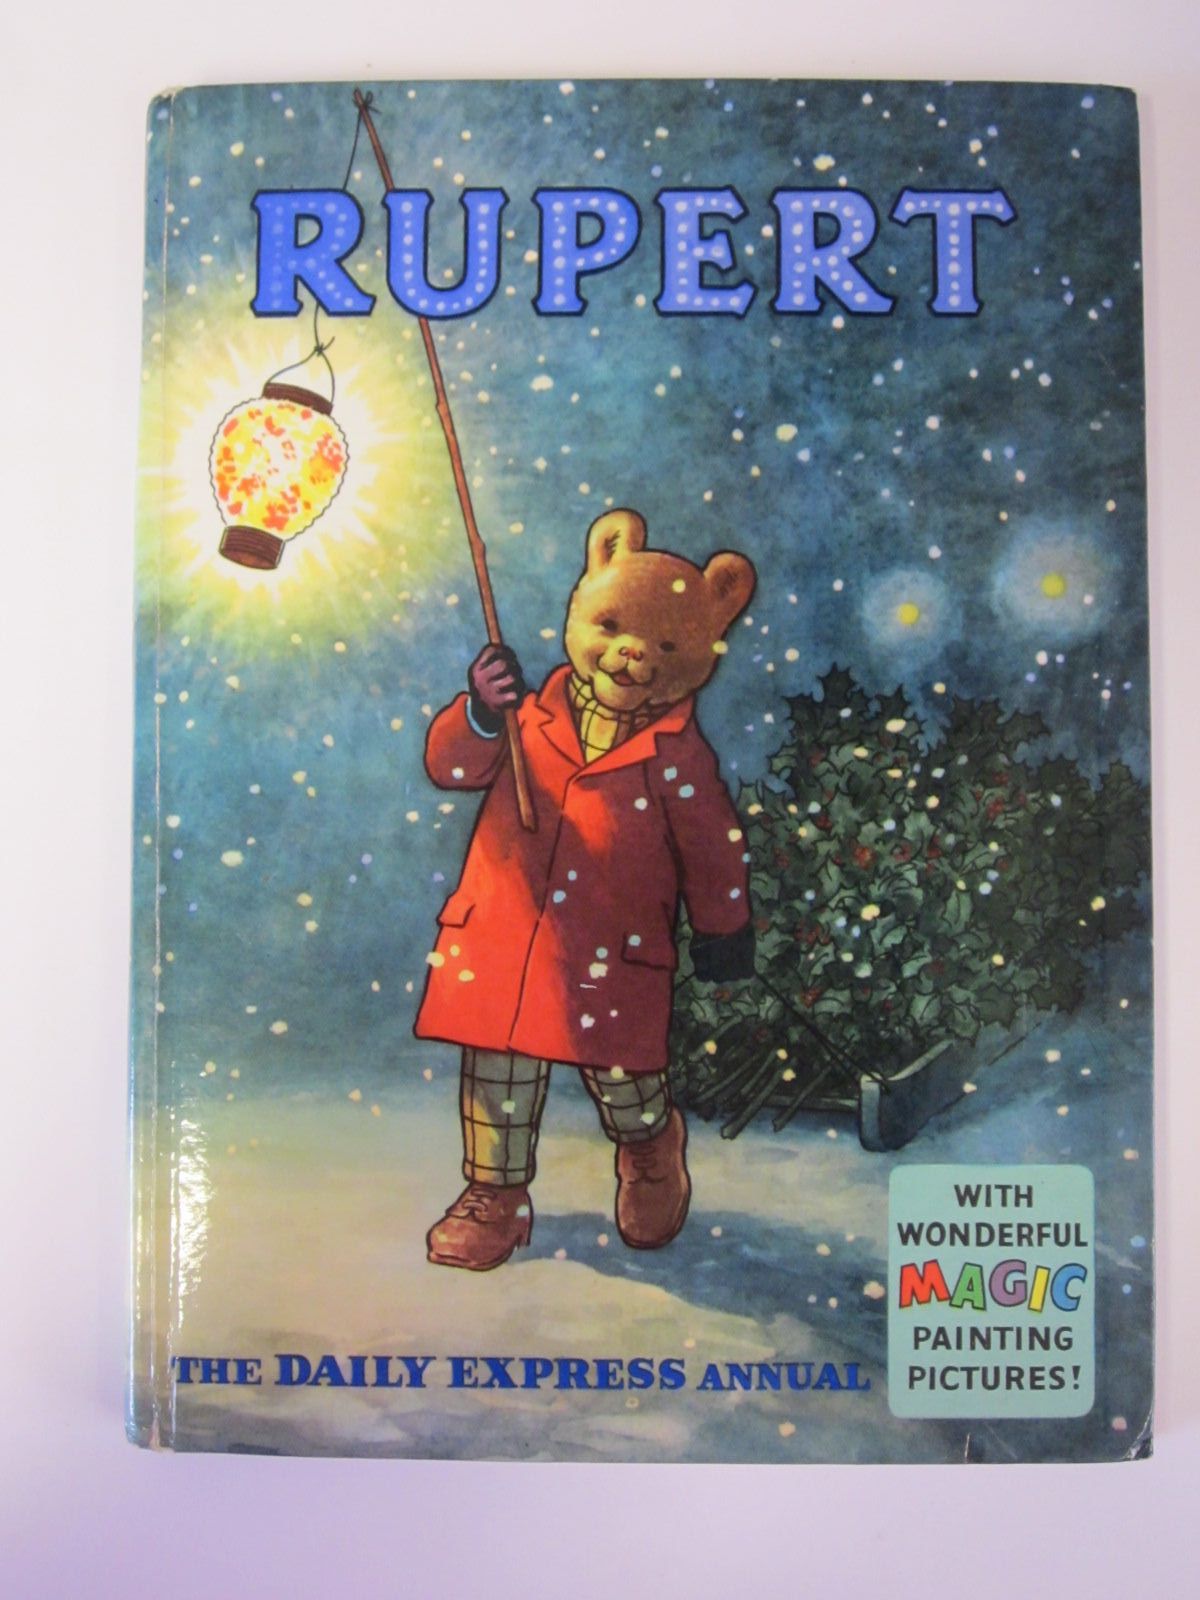 Cover of RUPERT ANNUAL 1960 by Alfred Bestall